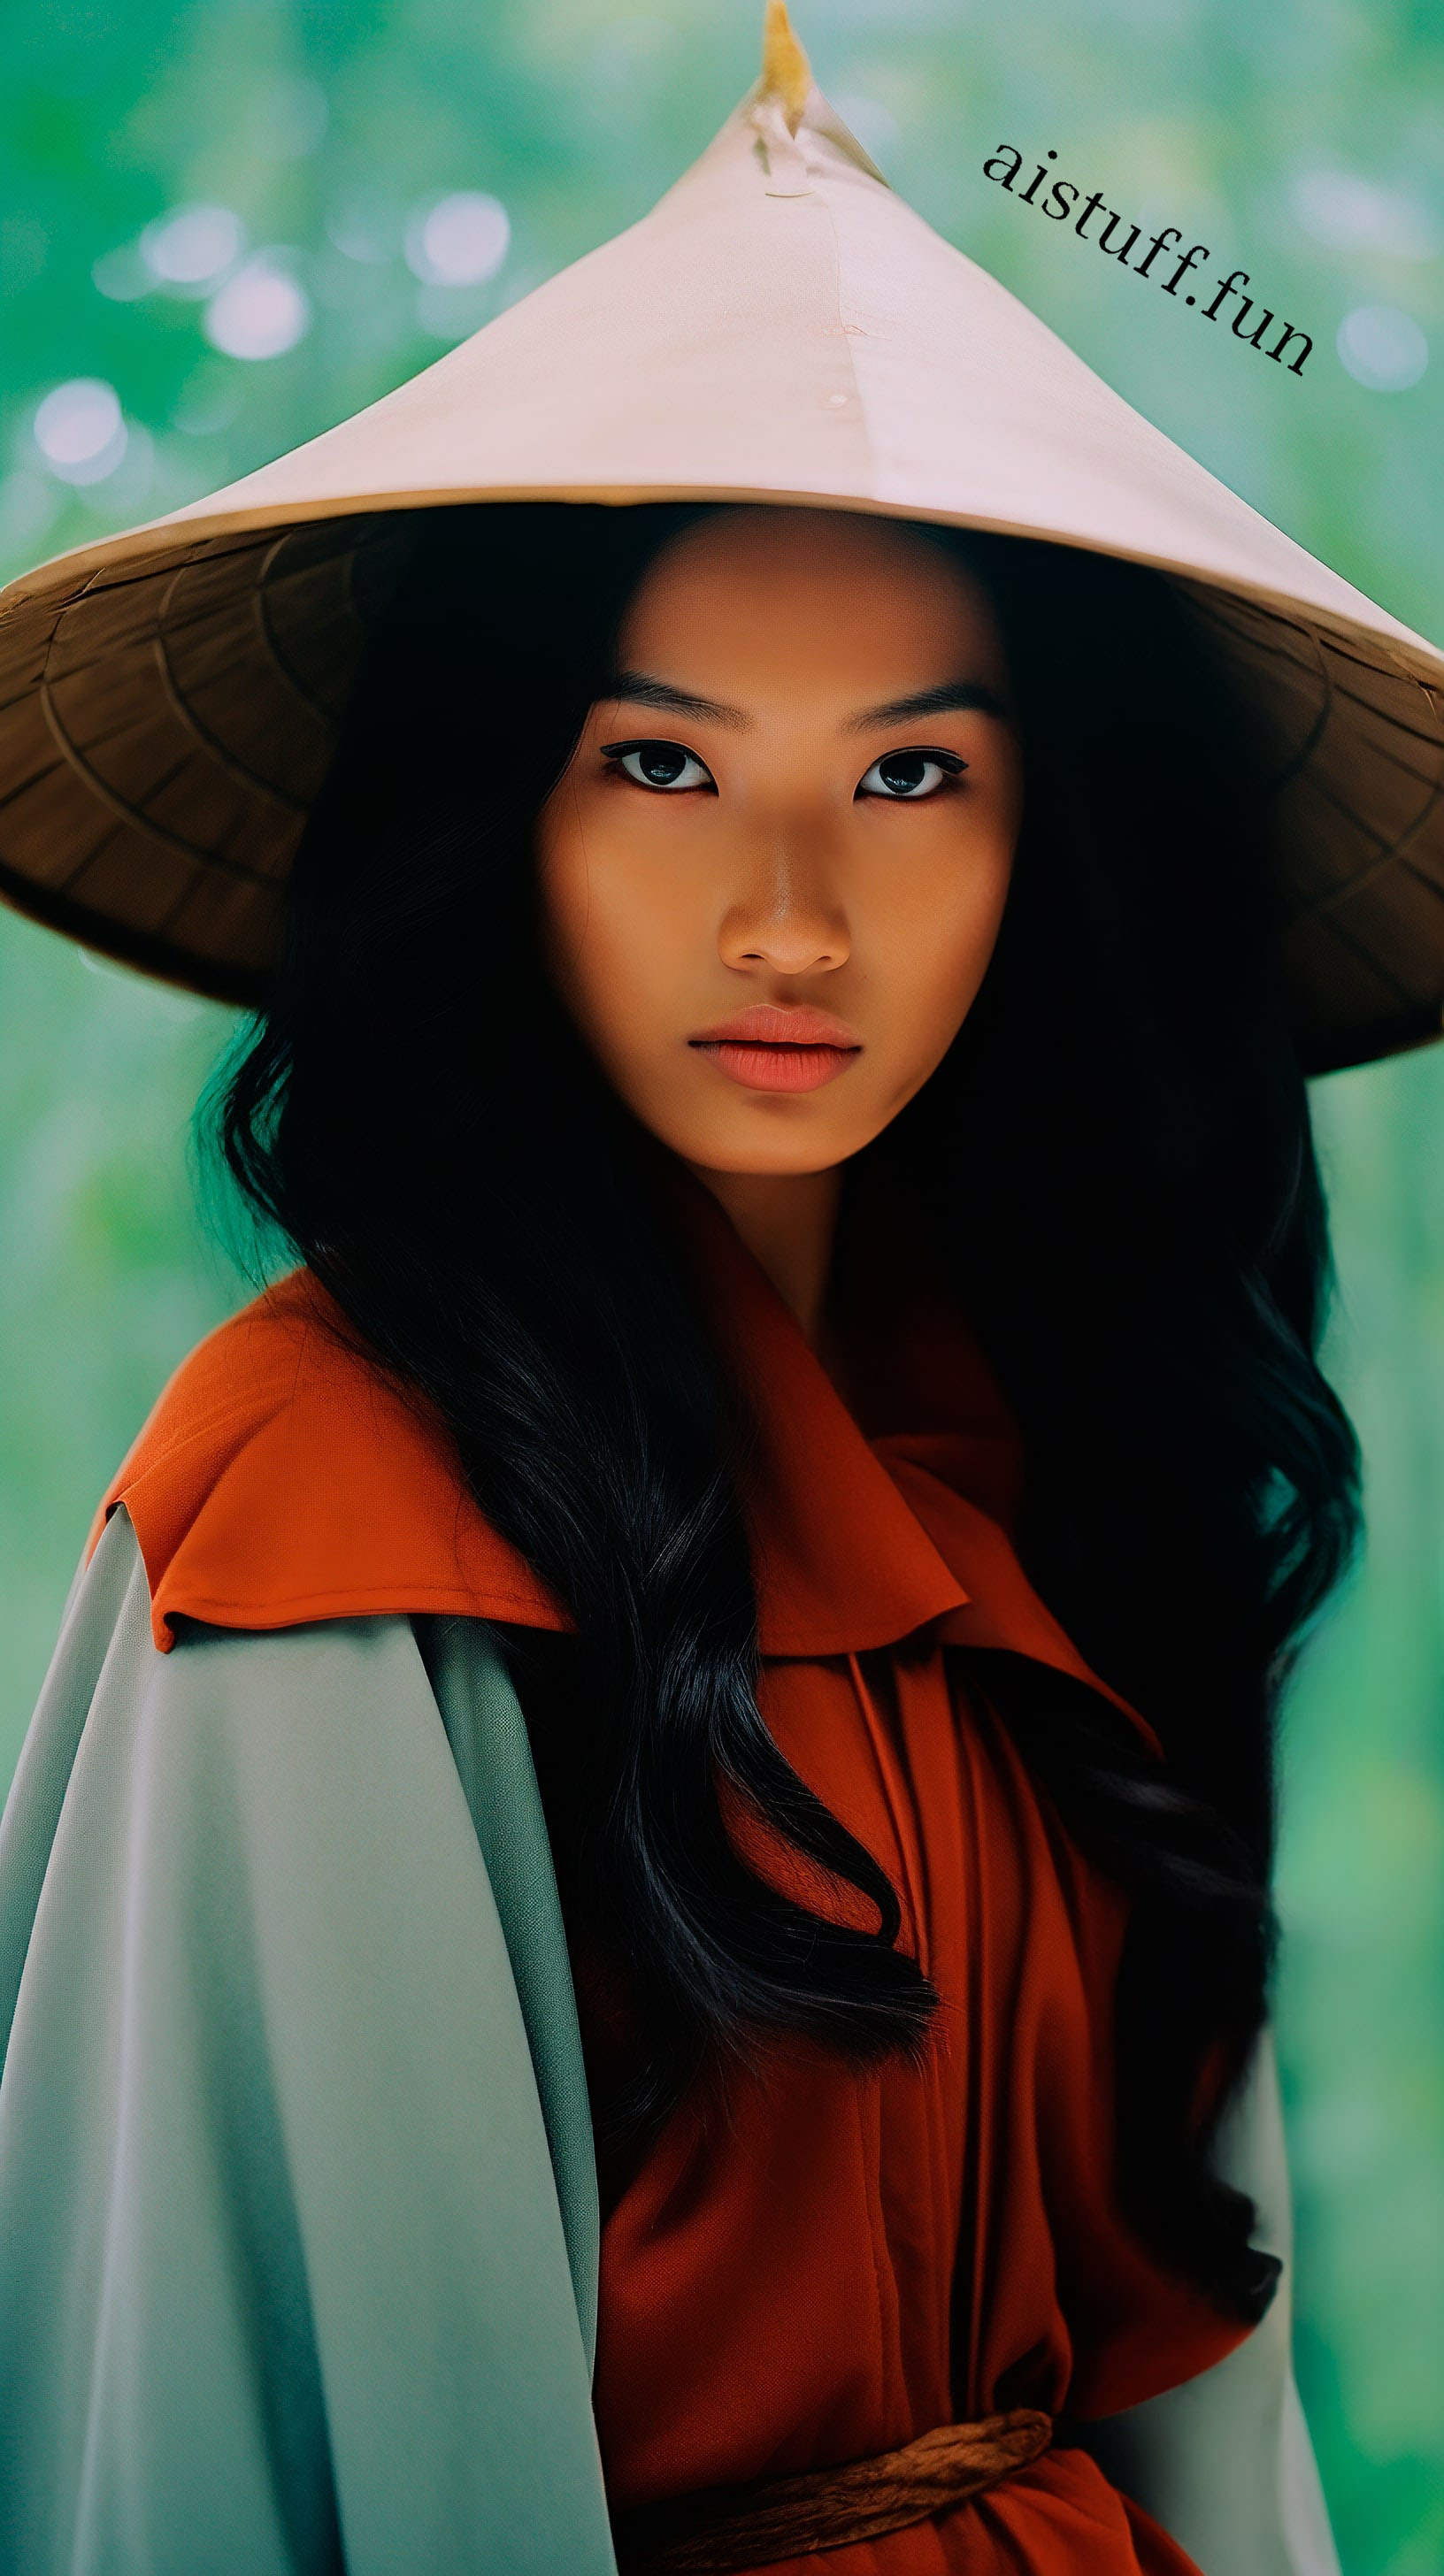 Vietnamese girl in Asian hat and red dress